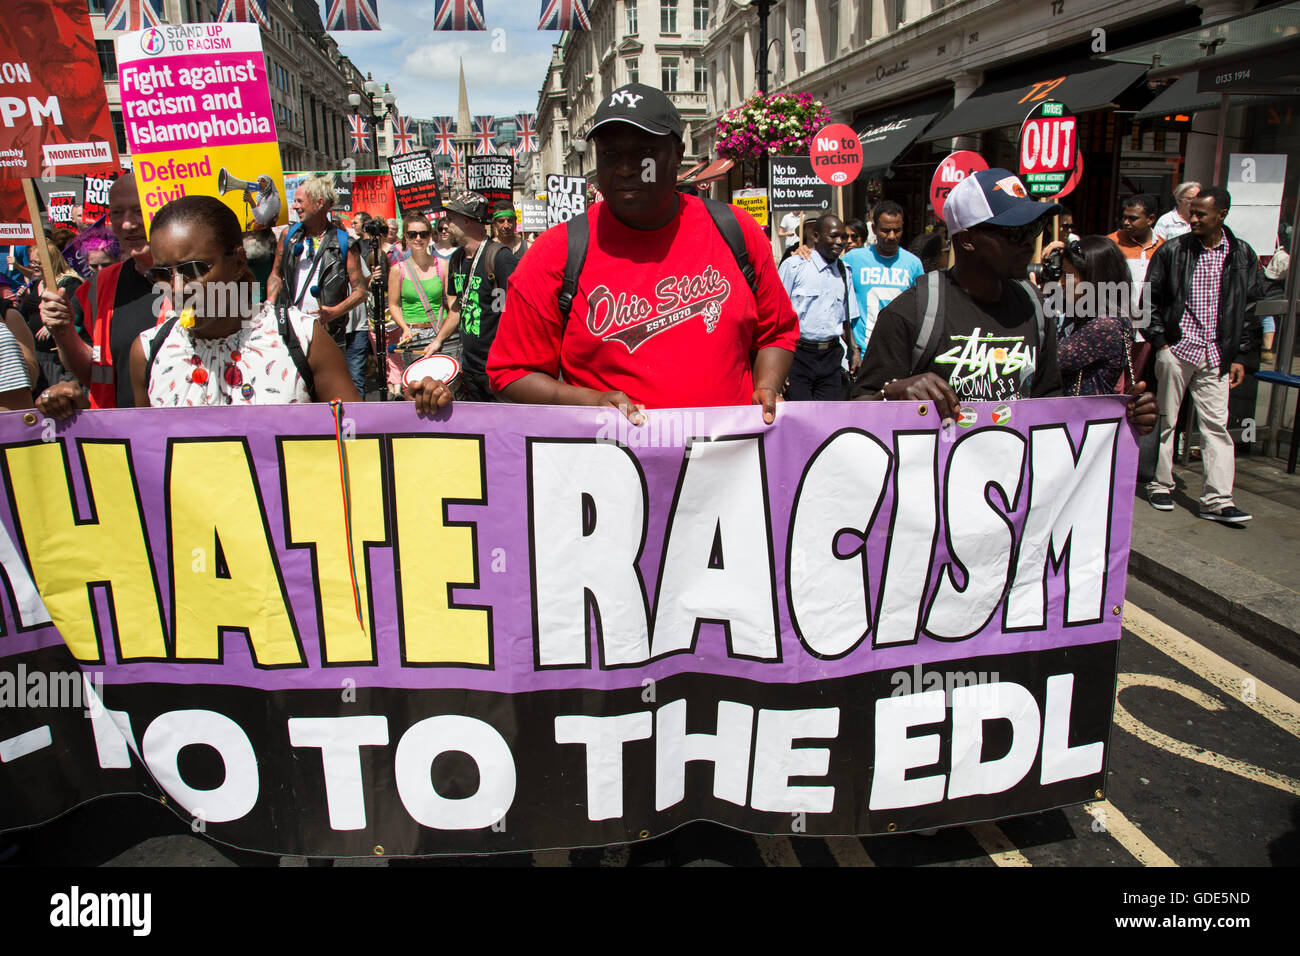 London, UK. 16th July, 2016. Black Lives Matter supporters at the Peoples Assembly demonstration: No More Austerity - No To Racism - Tories Must Go, on Saturday July 16th in London, United Kingdom. Tens of thousands of people gathered to protest in a march through the capital protesting against the Conservative Party cuts. Almost 150 Councillors from across the country have signed a letter criticising the Government for funding cuts and and will be joining those marching in London. Credit:  Michael Kemp/Alamy Live News Stock Photo